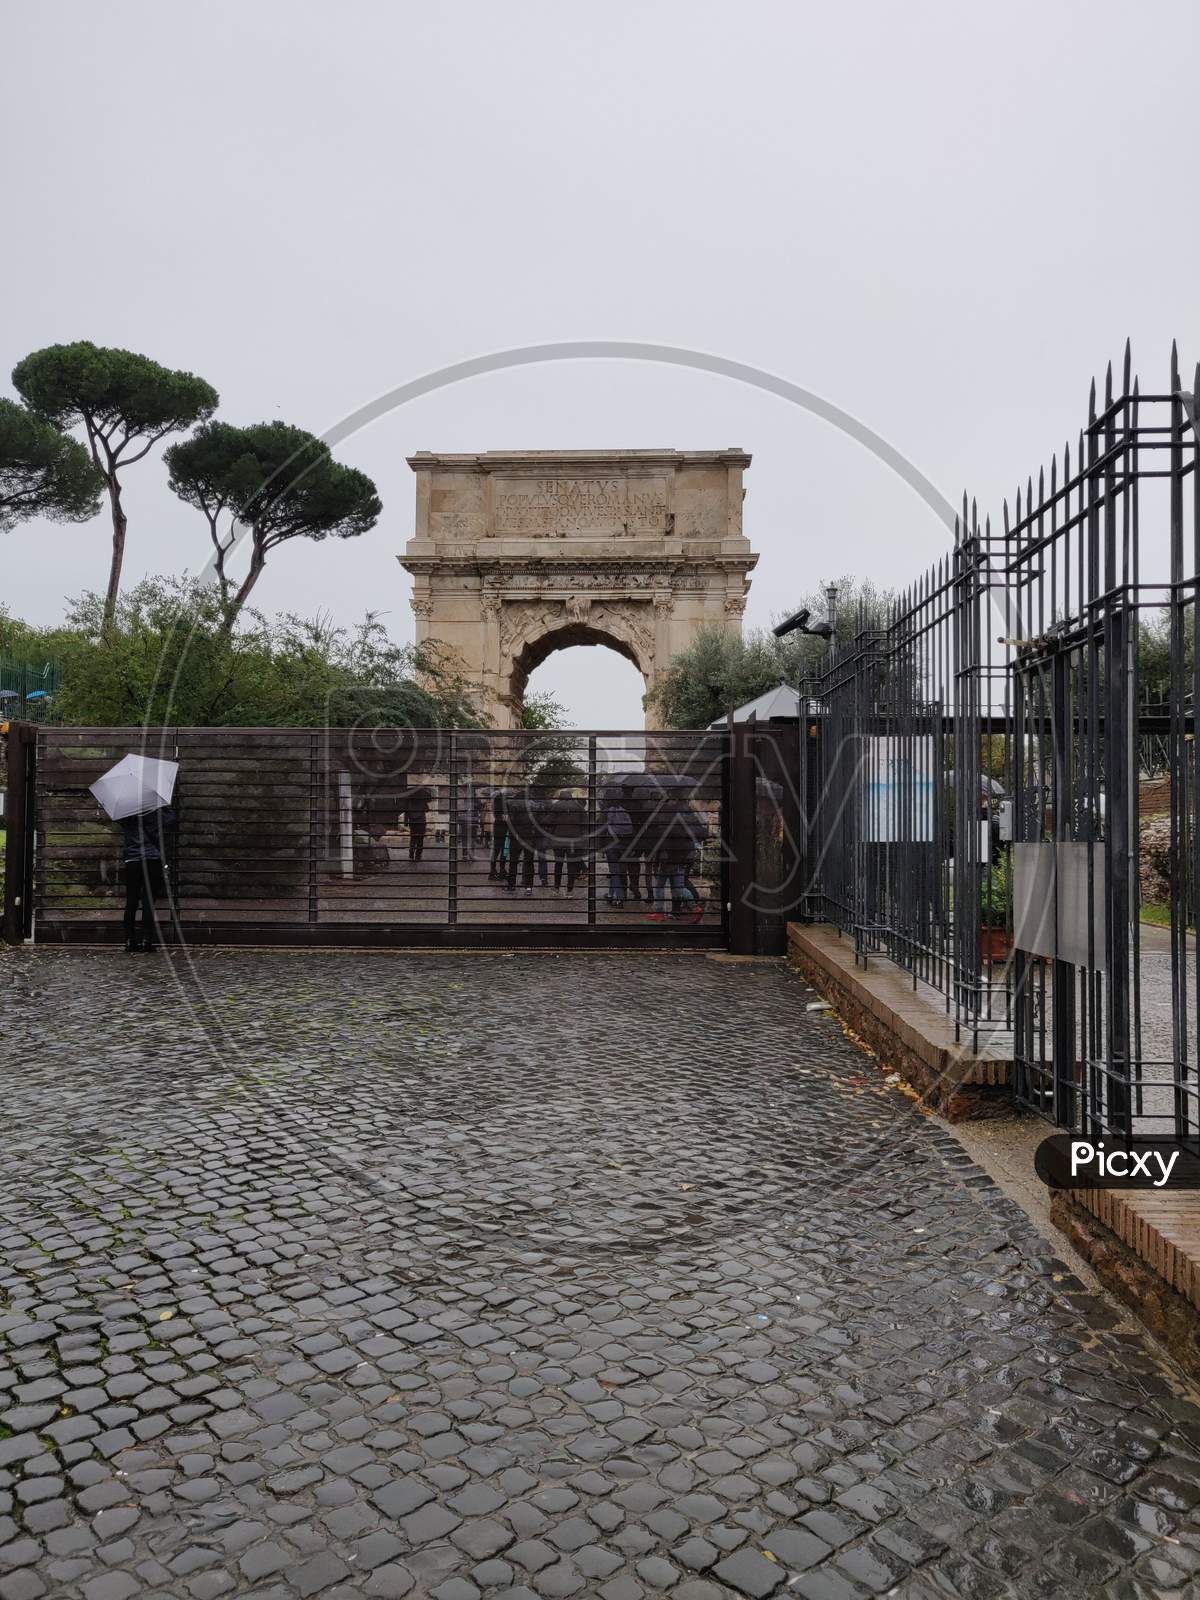 Entry Gate of Piazza del Colosseo